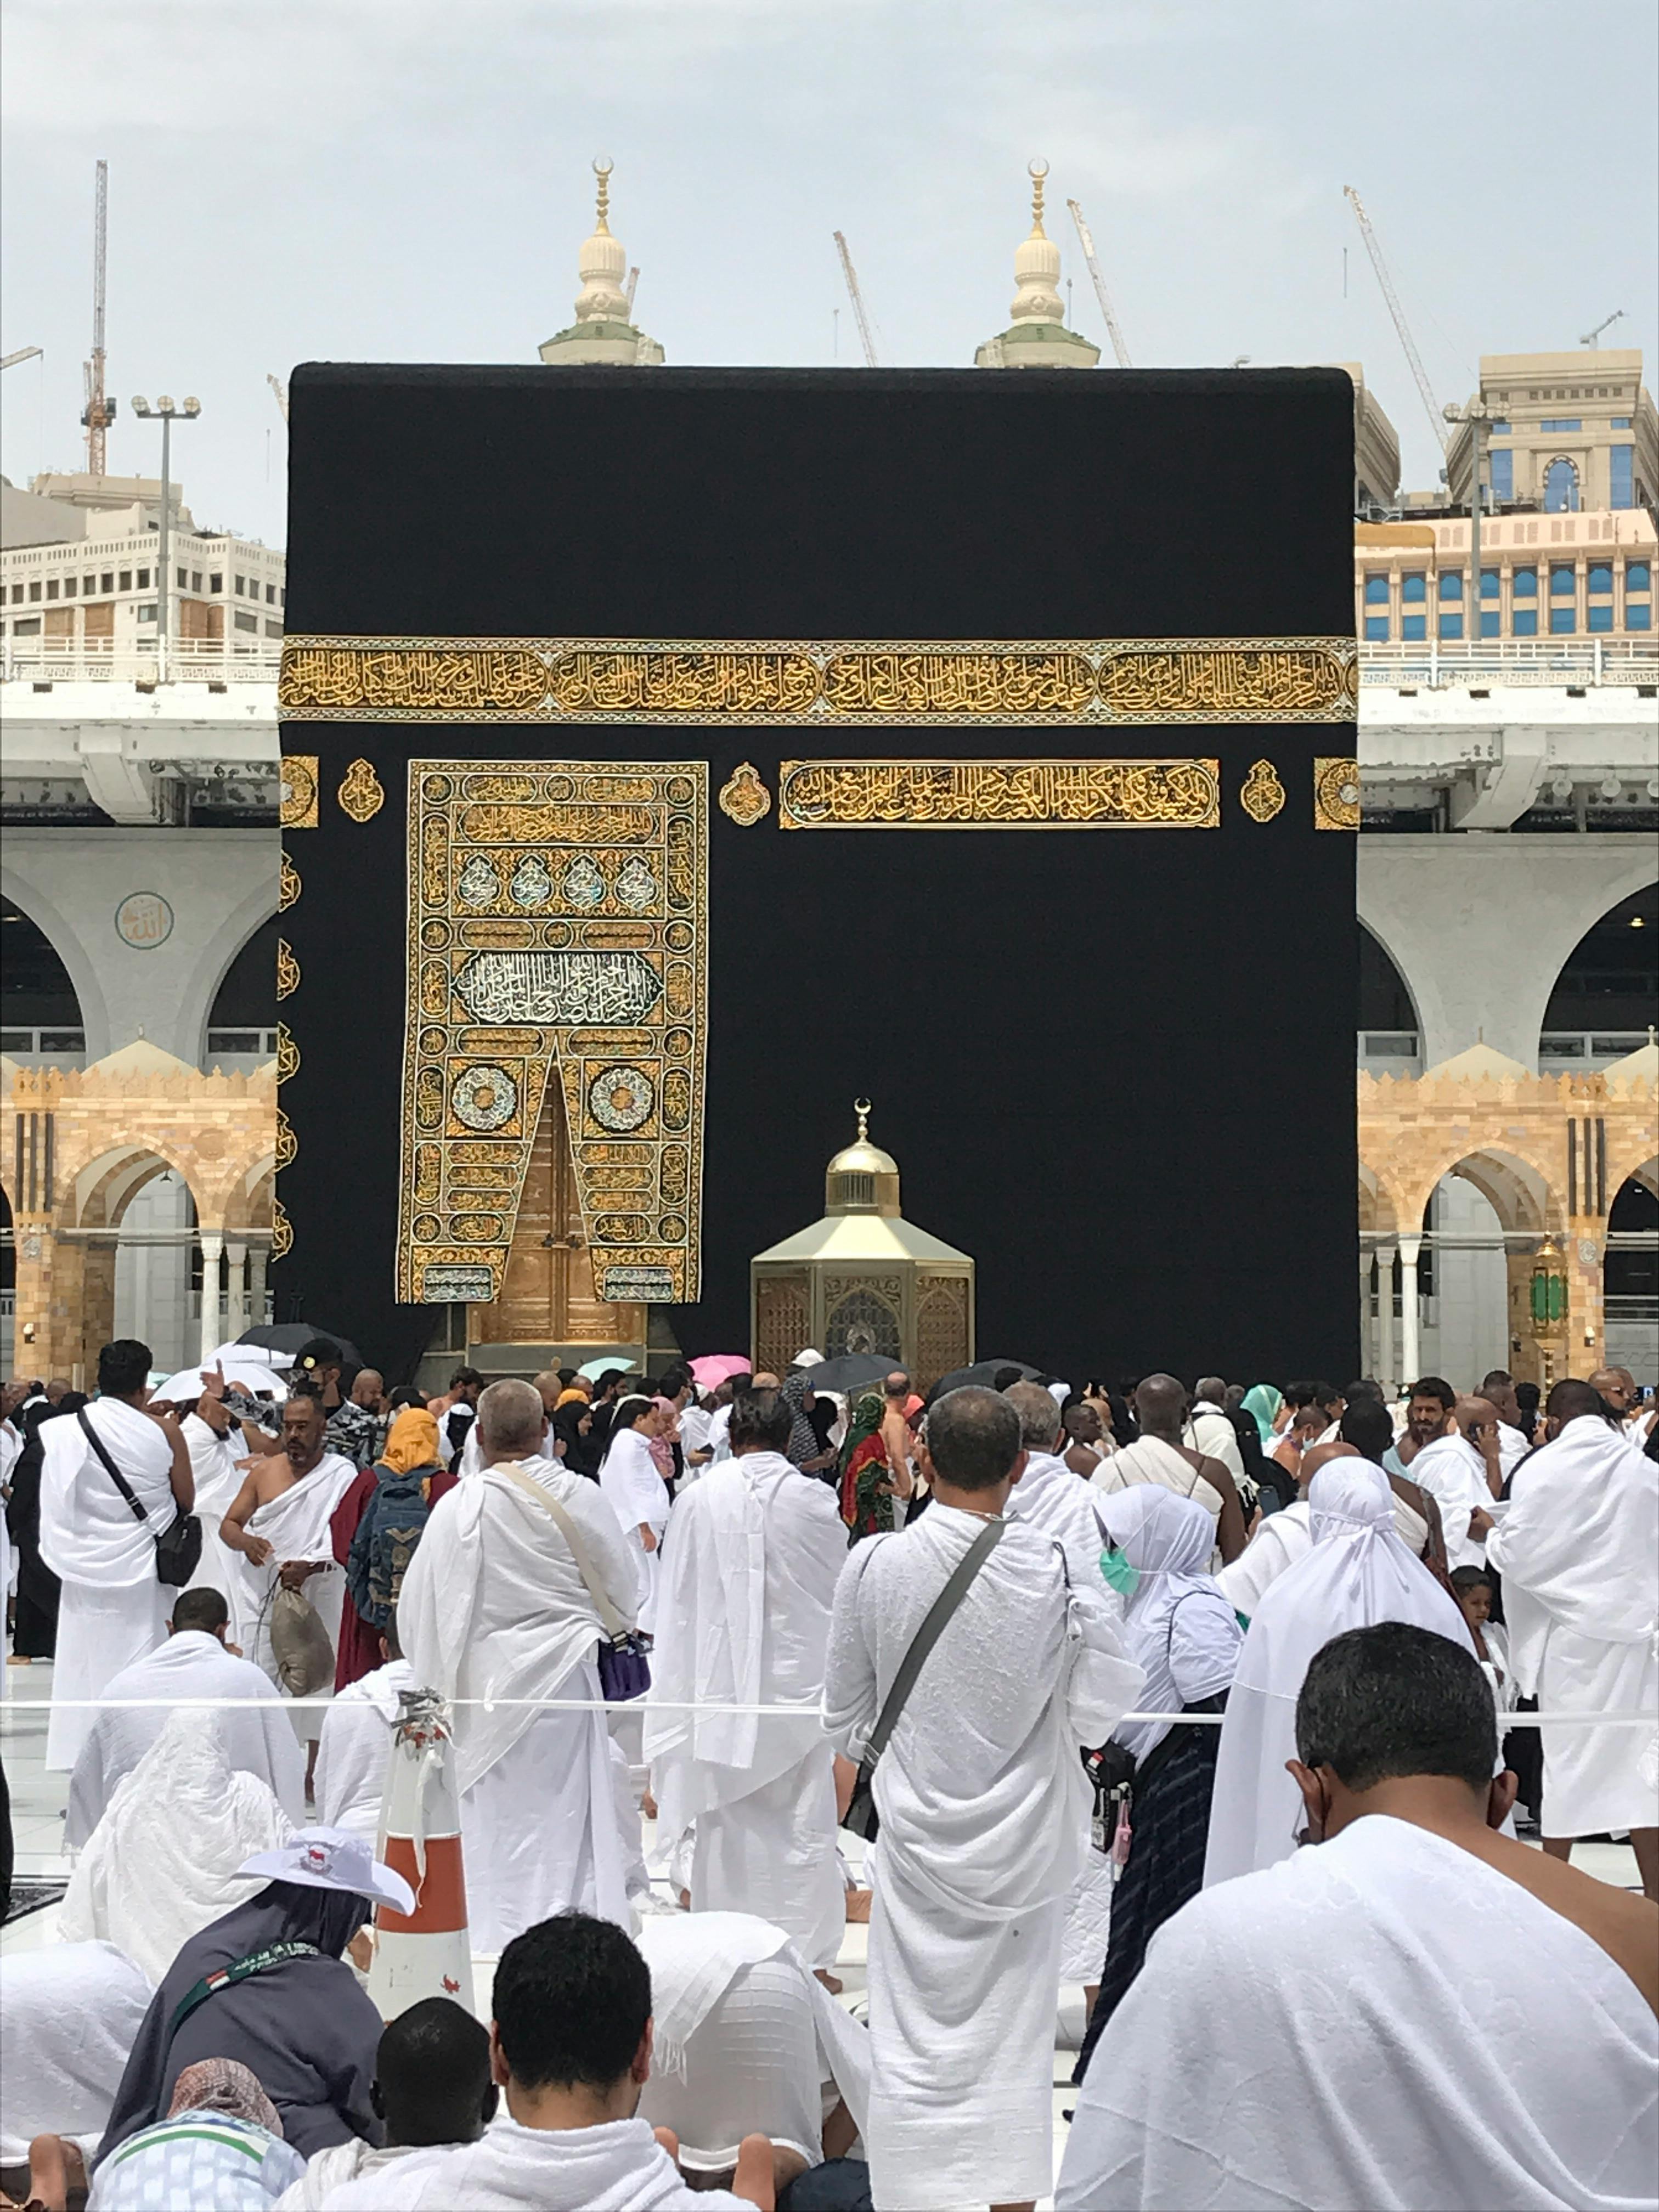 Mecca Background Images HD Pictures and Wallpaper For Free Download   Pngtree